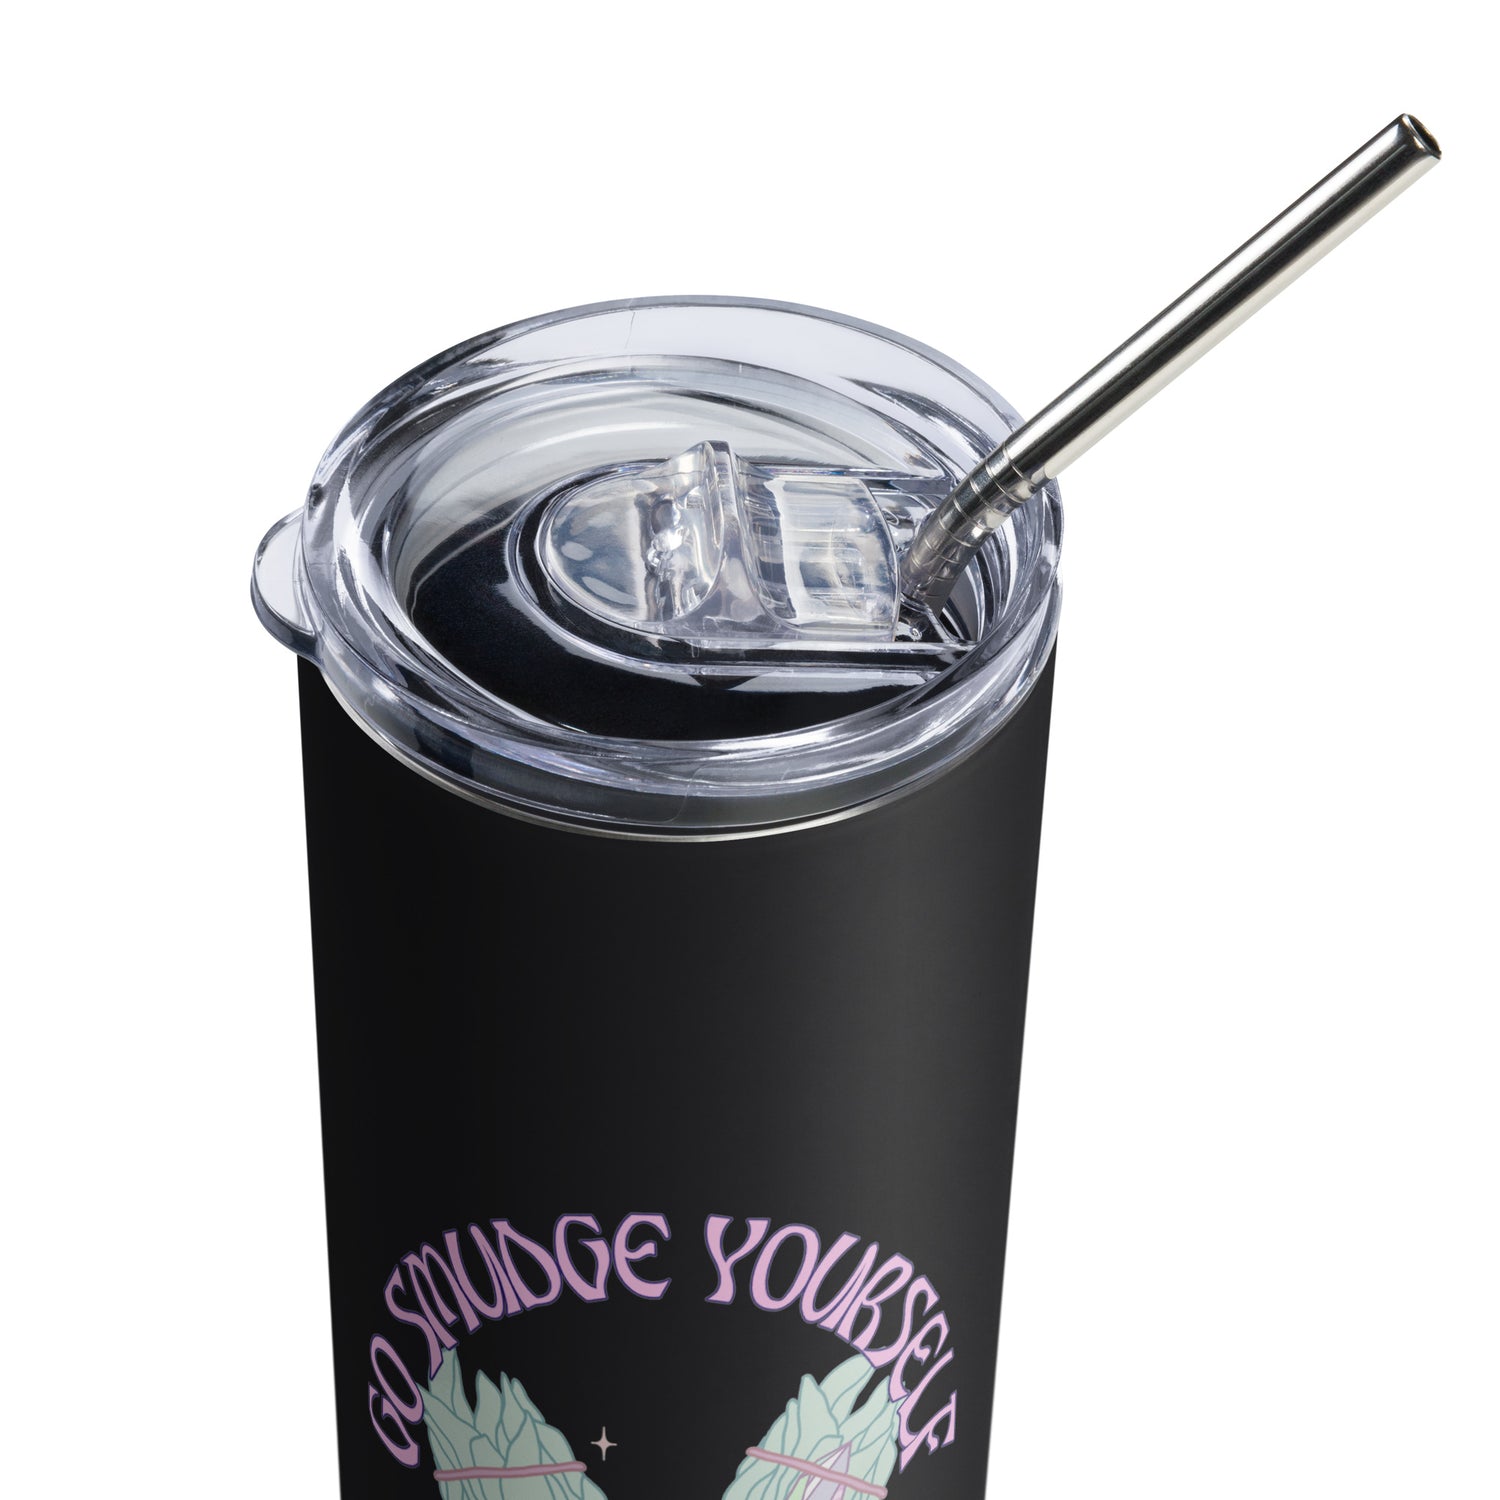 Go Smudge Yourself Stainless steel tumbler - Witchy Kitchens